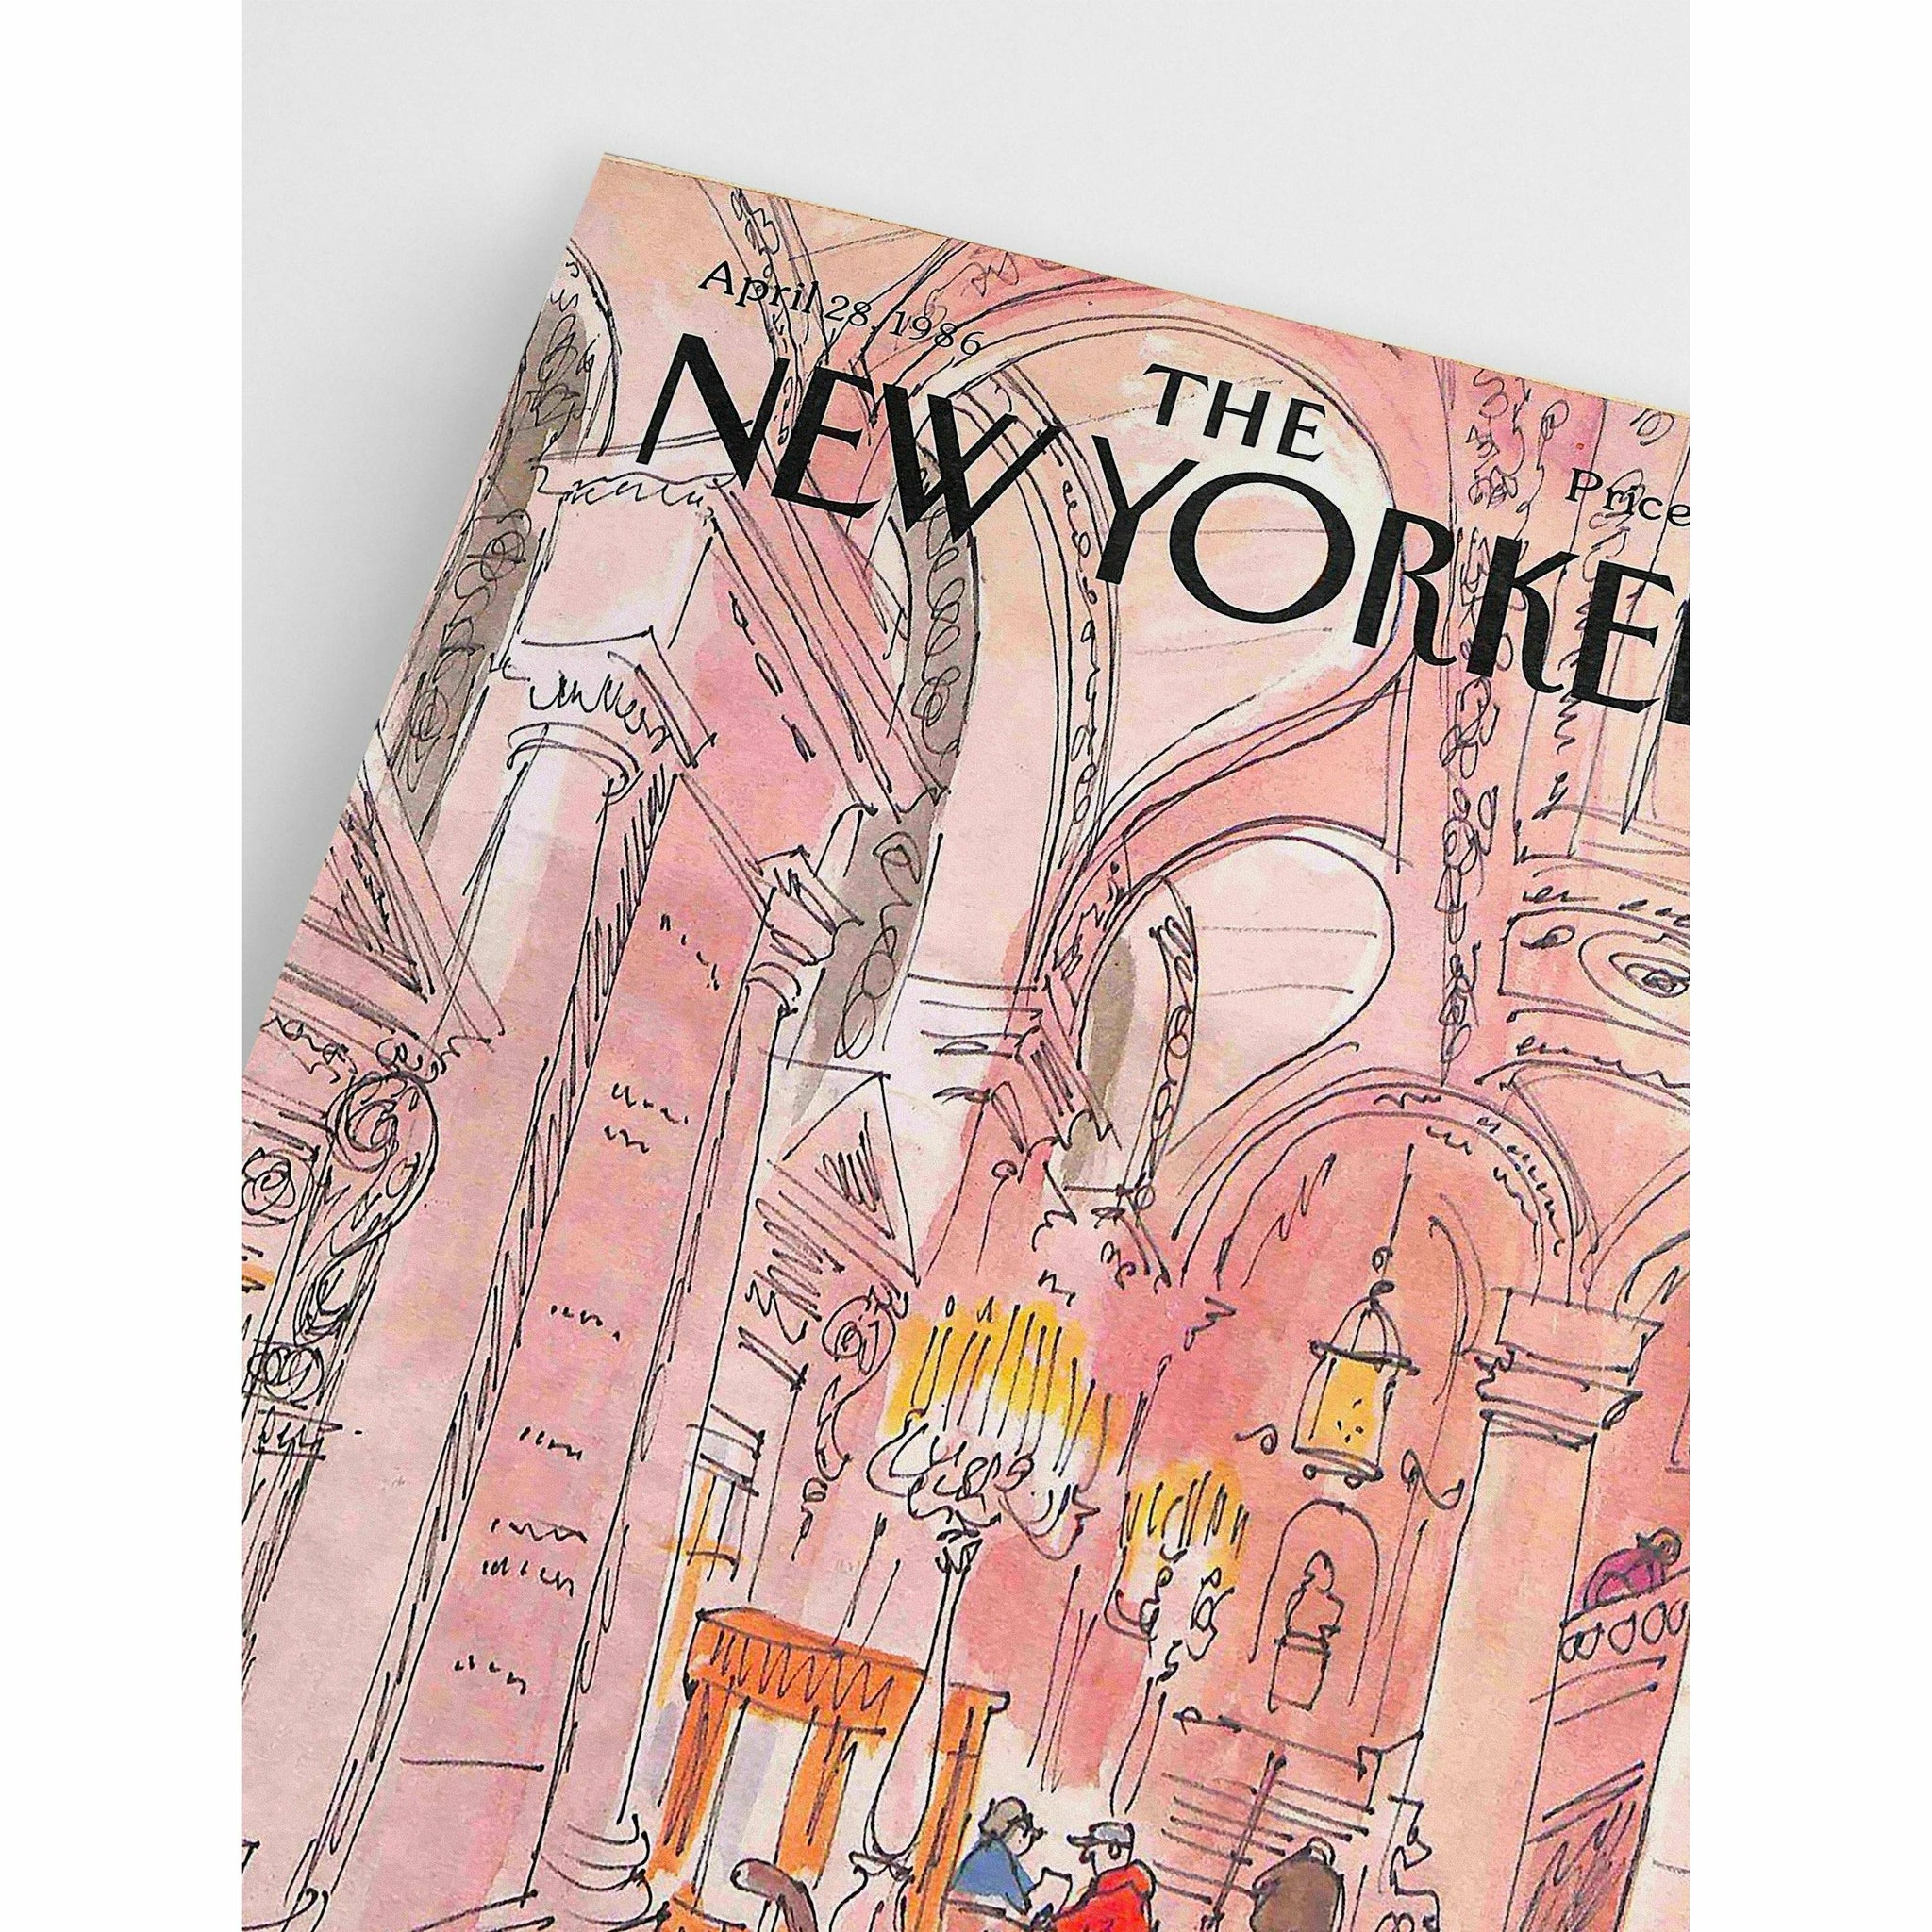 The New Yorker Poster 1986, Lobby